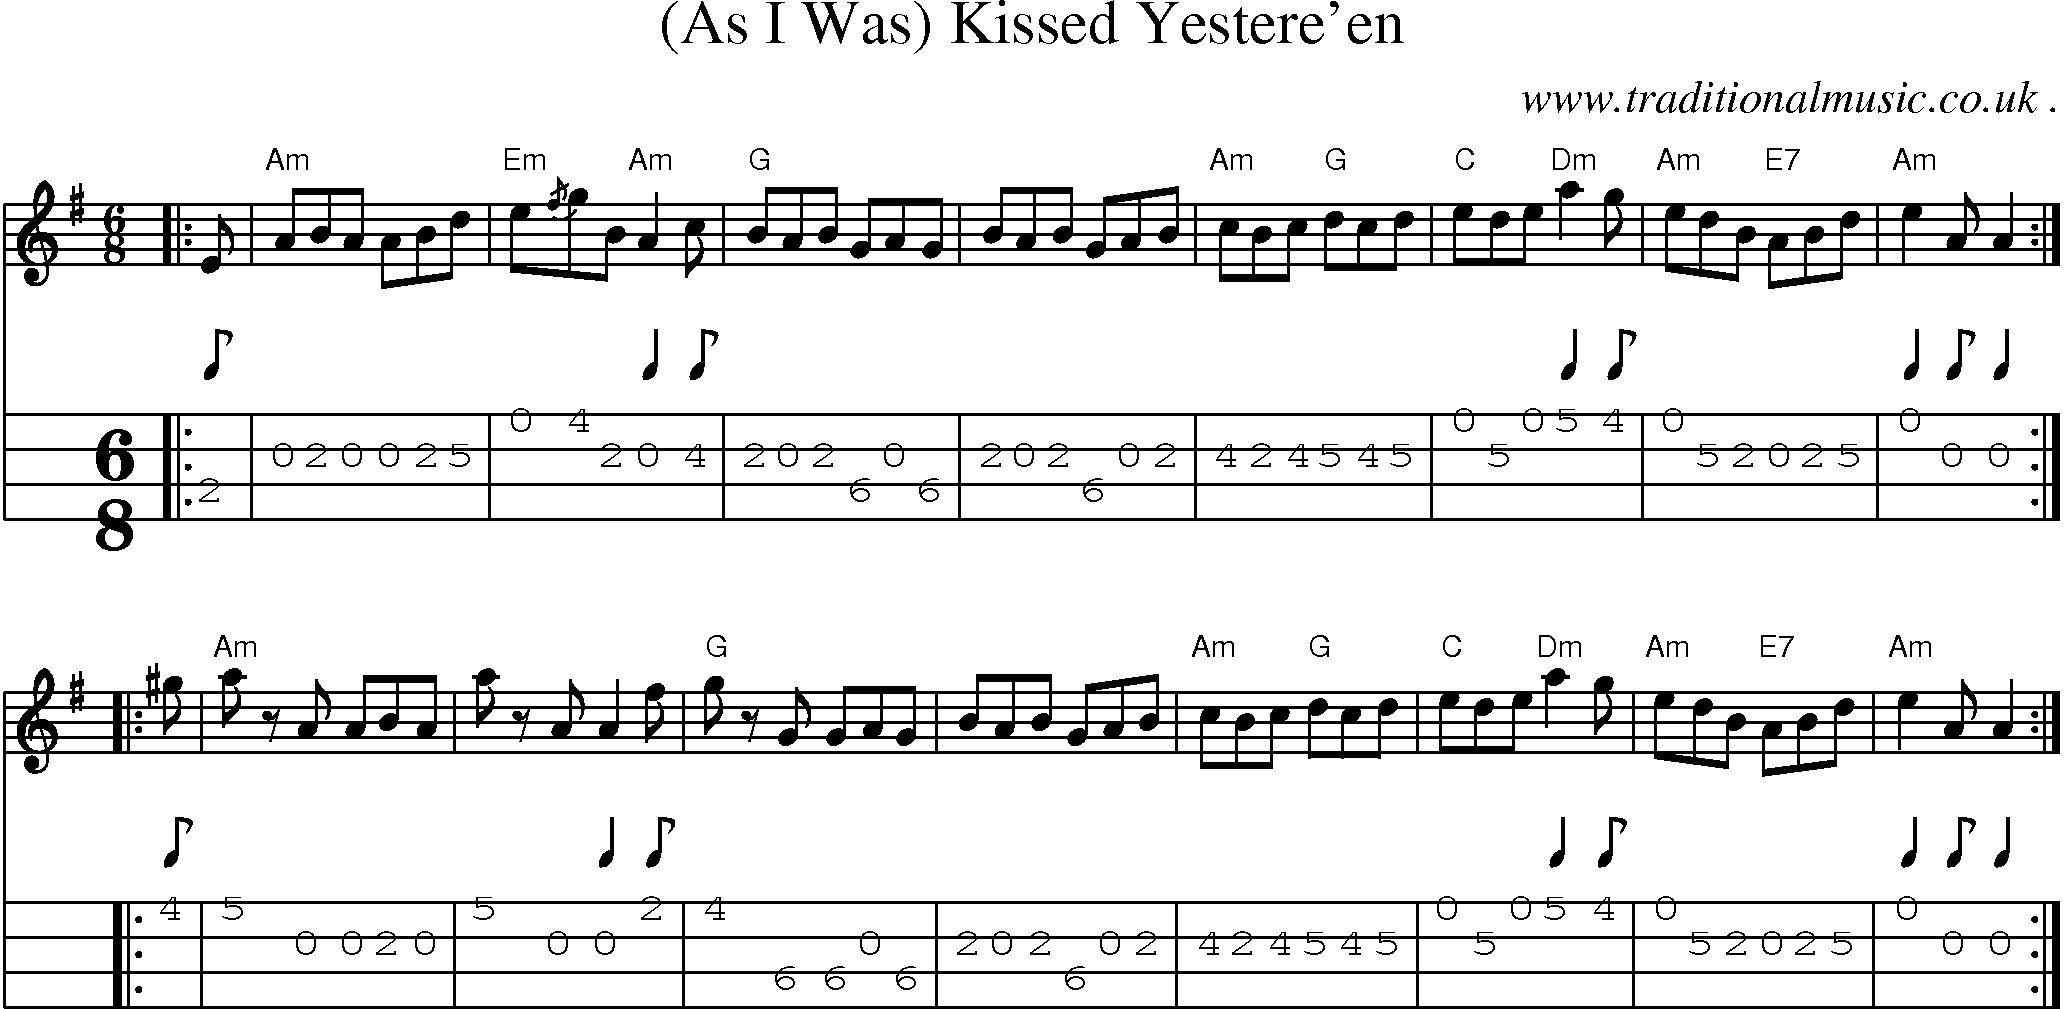 Sheet-music  score, Chords and Mandolin Tabs for As I Was Kissed Yestereen